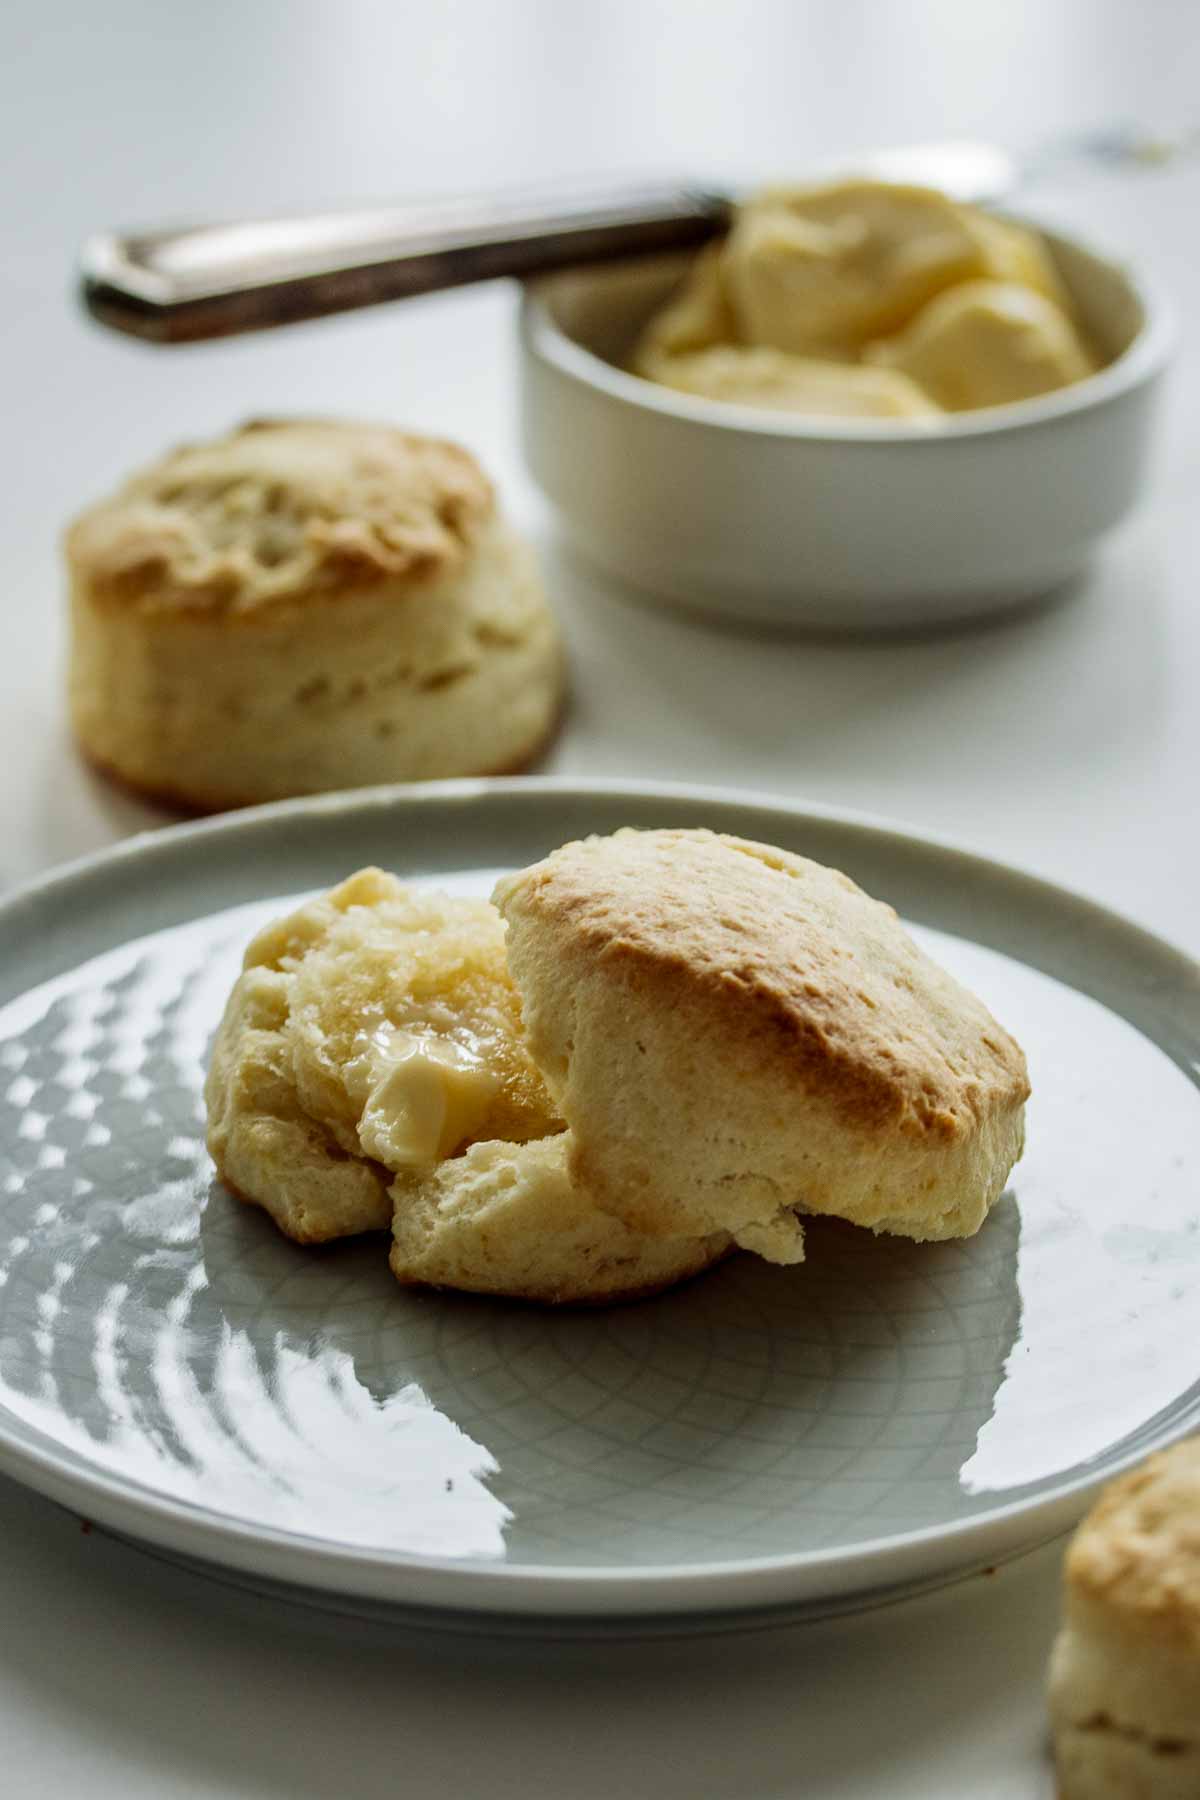 Biscuit sliced open, with melting butter.